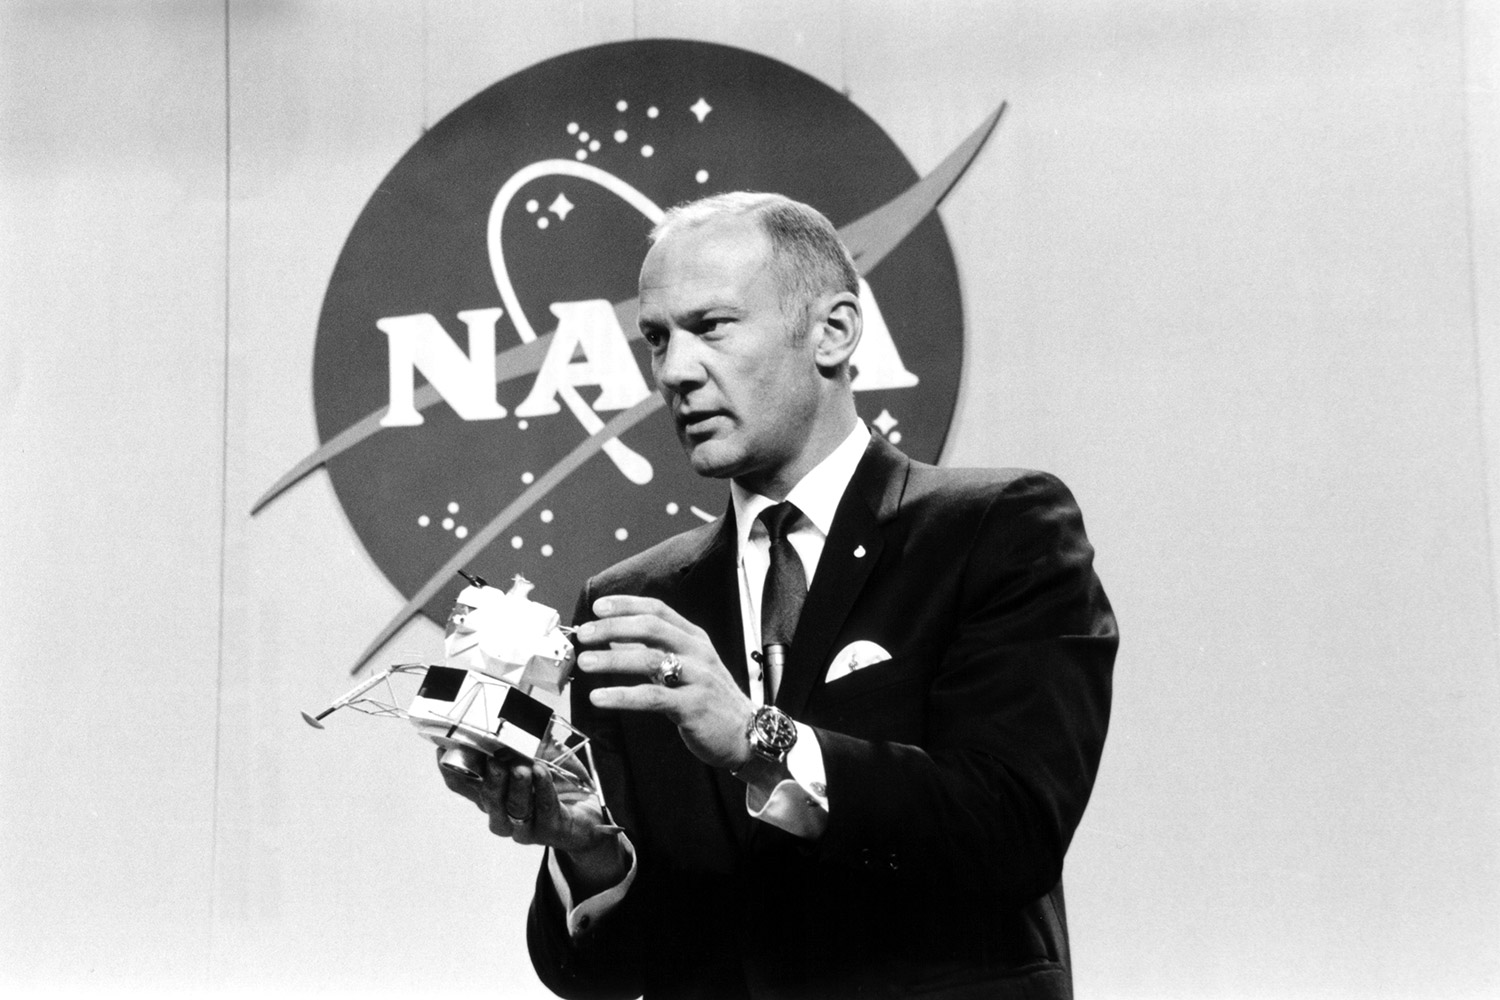 Buzz Aldrin holds up a model of the lunar lander during a press conference to announce the crew members for Apollo 11. The briefing was hel d in Houston, Texas on Jan. 10, 1969. Credit: NASA via Retro Space Images